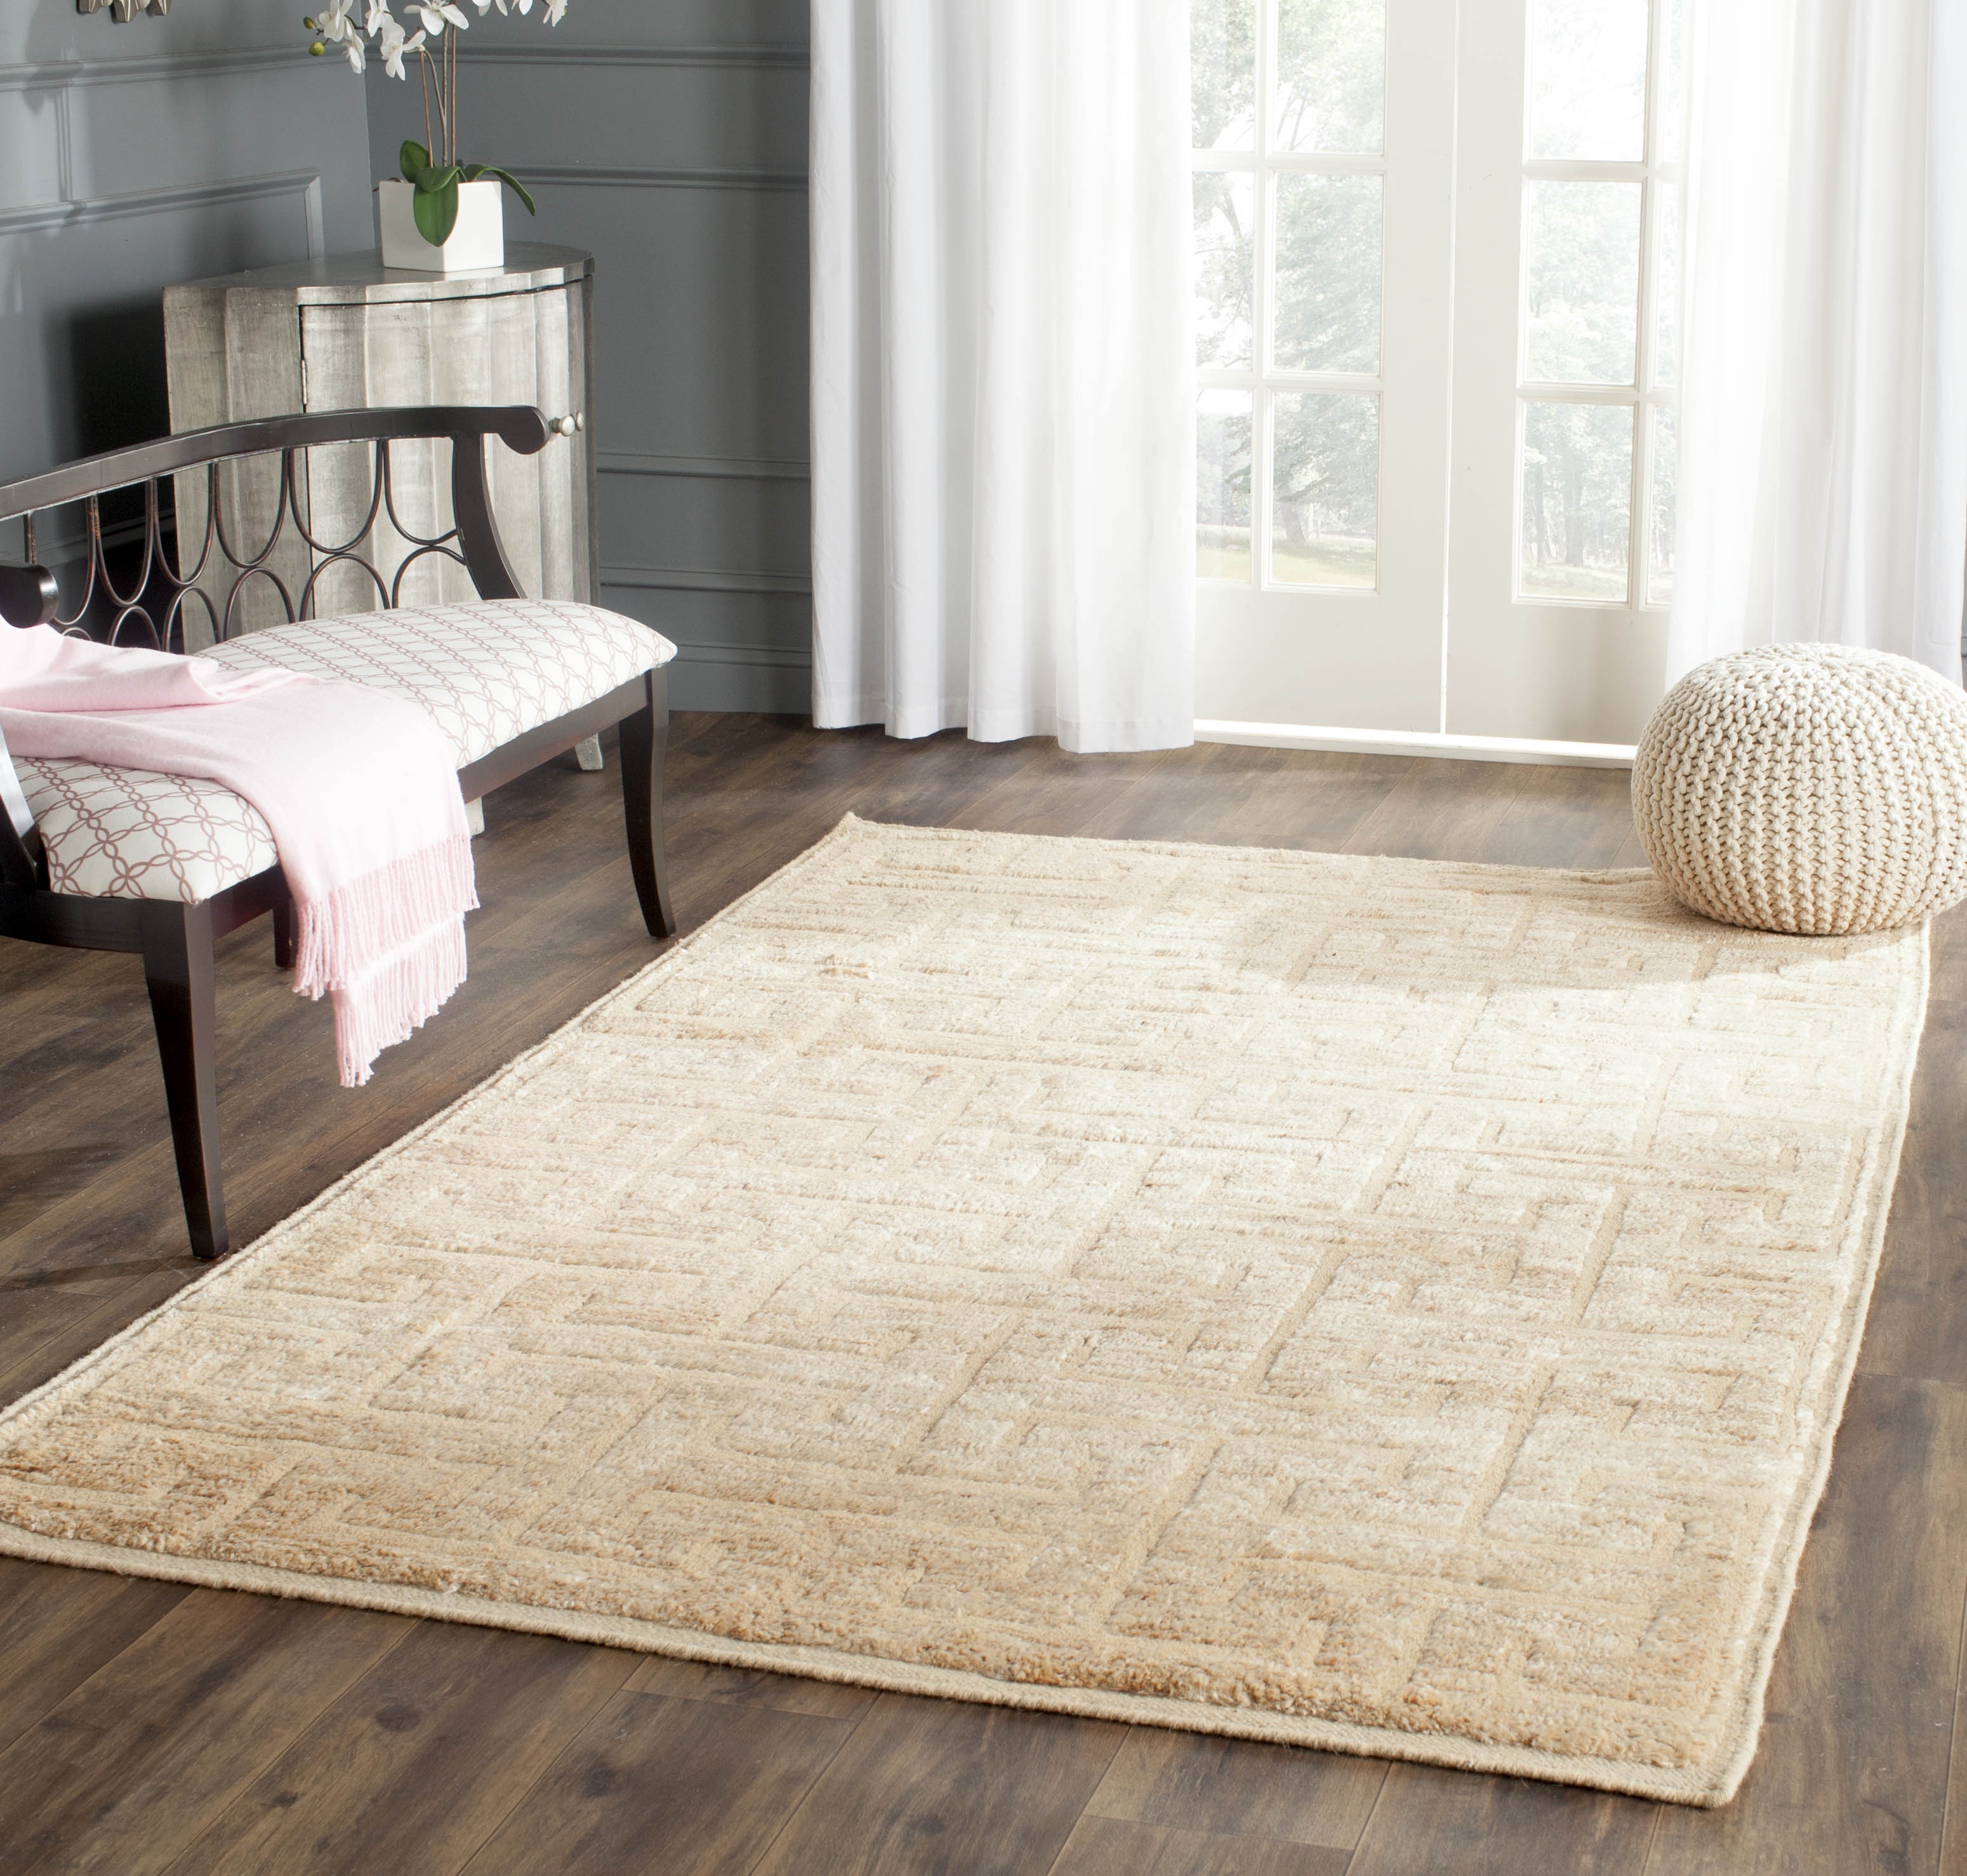 Arlo Home Hand Knotted Area Rug, TGR417A, Ivory/Beige,  4' X 6' - Image 1